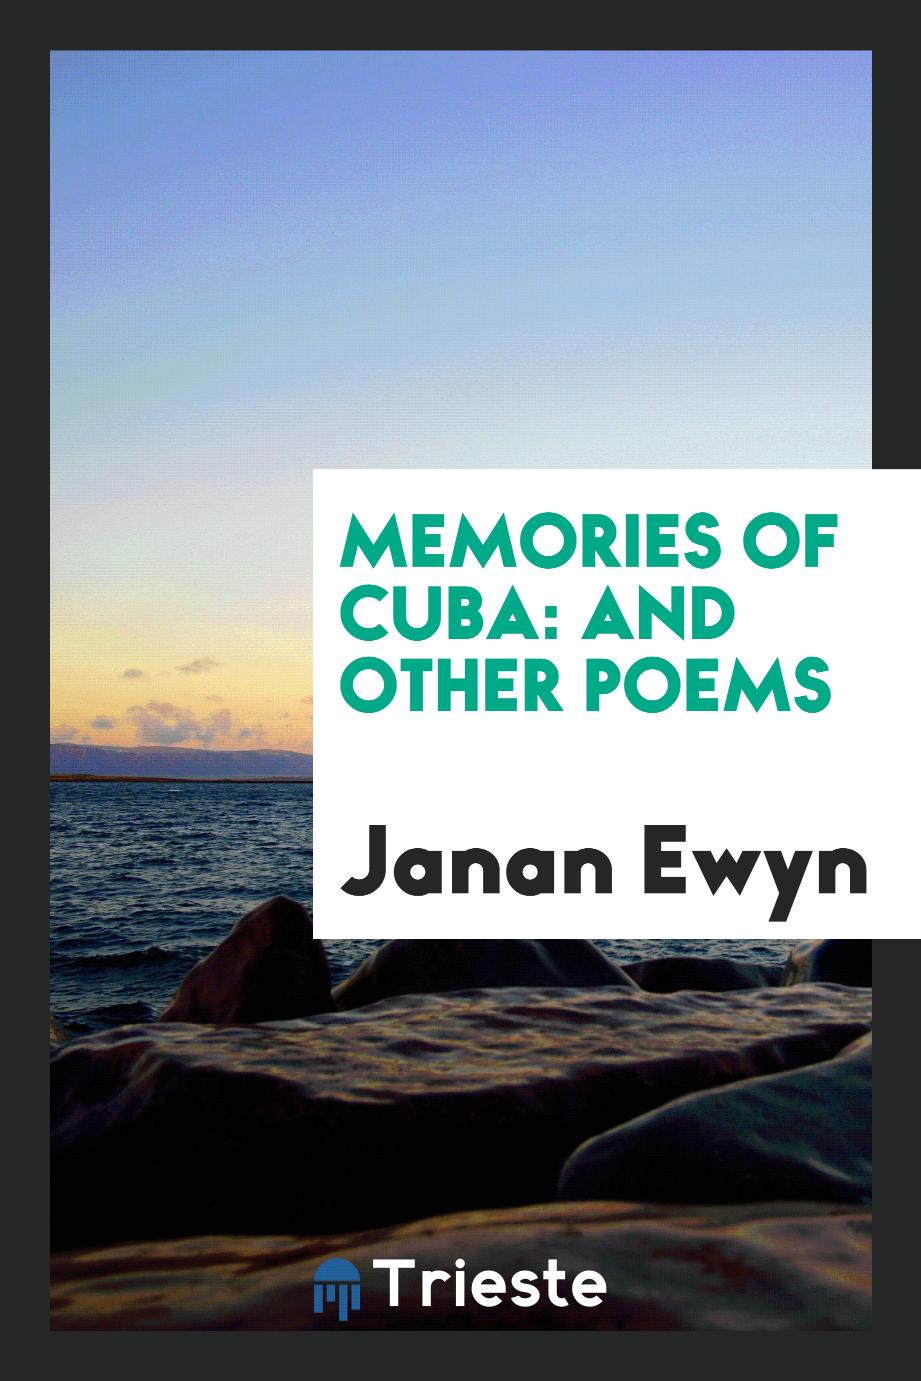 Memories of Cuba: And Other Poems